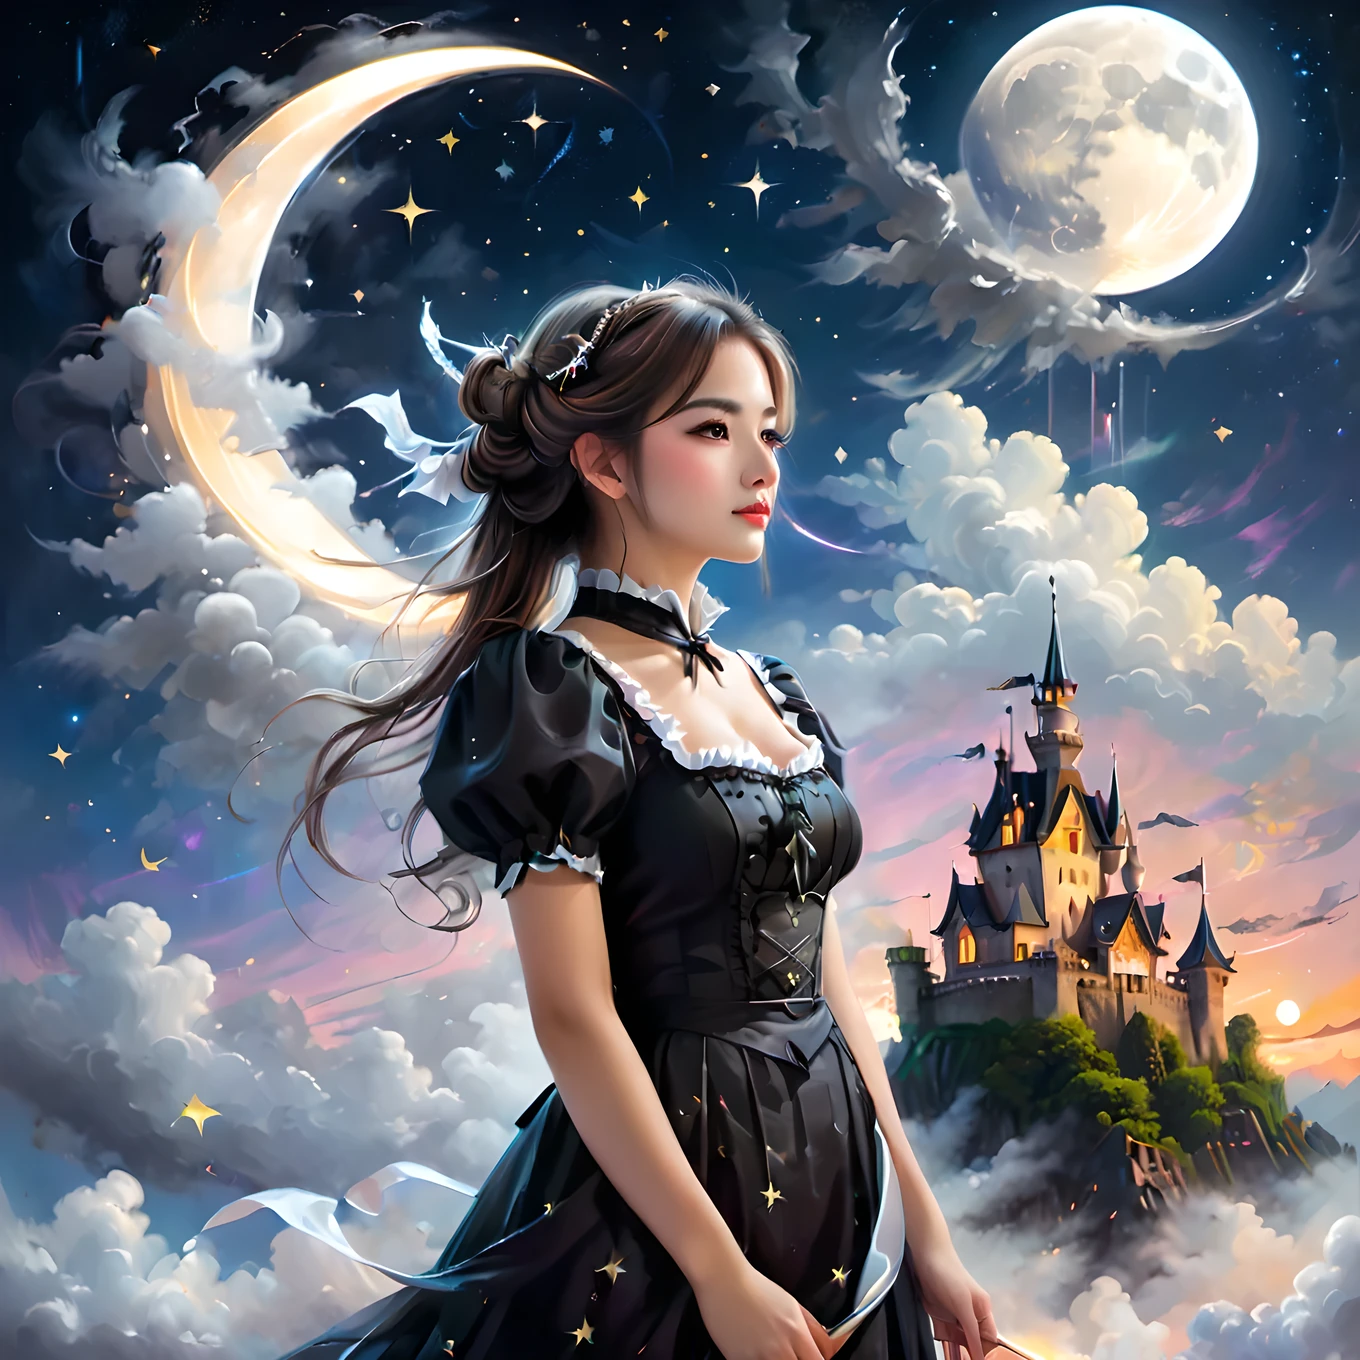 Illustration of maid with elaborate aura of loyalty, profile, crisp contrasts, gentle touch, accurate detail, precision, fluffy clouds and crescent moon, single shooting star, neon-lit shooting star trails, high-quality oil painting, stunningly beautiful touch rendering, artistic Clouds and moon, Fantasy, Fog around old castle, Flying owl